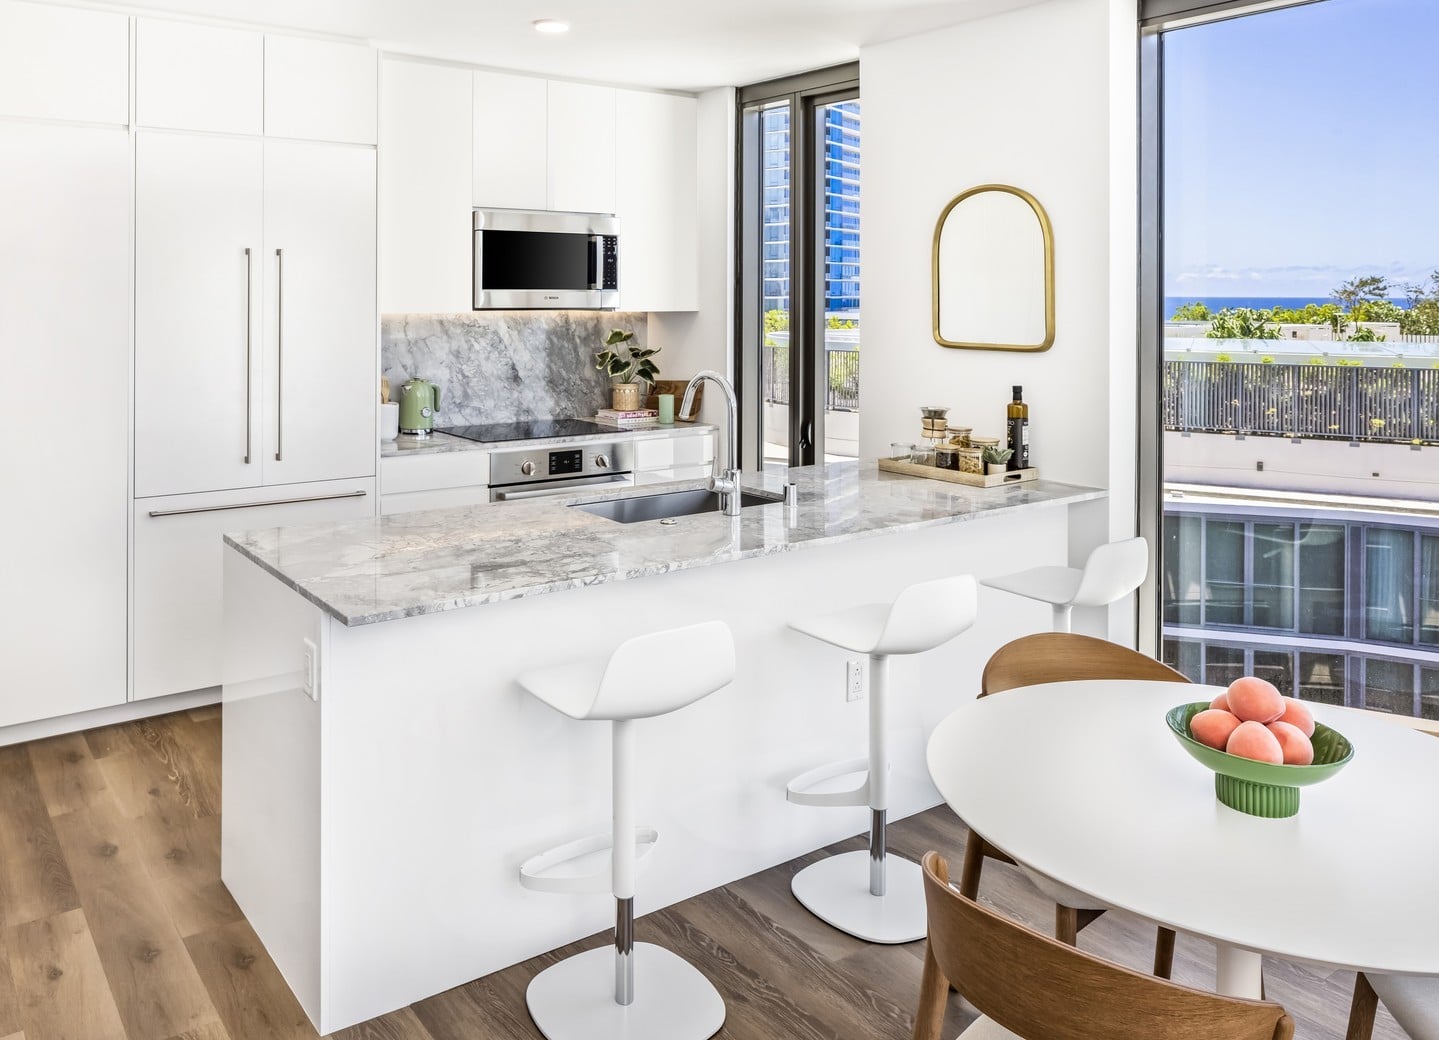 Inspire your inner chef at ʻAʻaliʻi with modern, custom-designed kitchens featuring a Bosch suite of appliances, a custom panel-finish refrigerator and dishwasher, natural stone countertops, and a full-height backsplash. Learn more about these fully furnished move-in ready residences at the link in our bio.